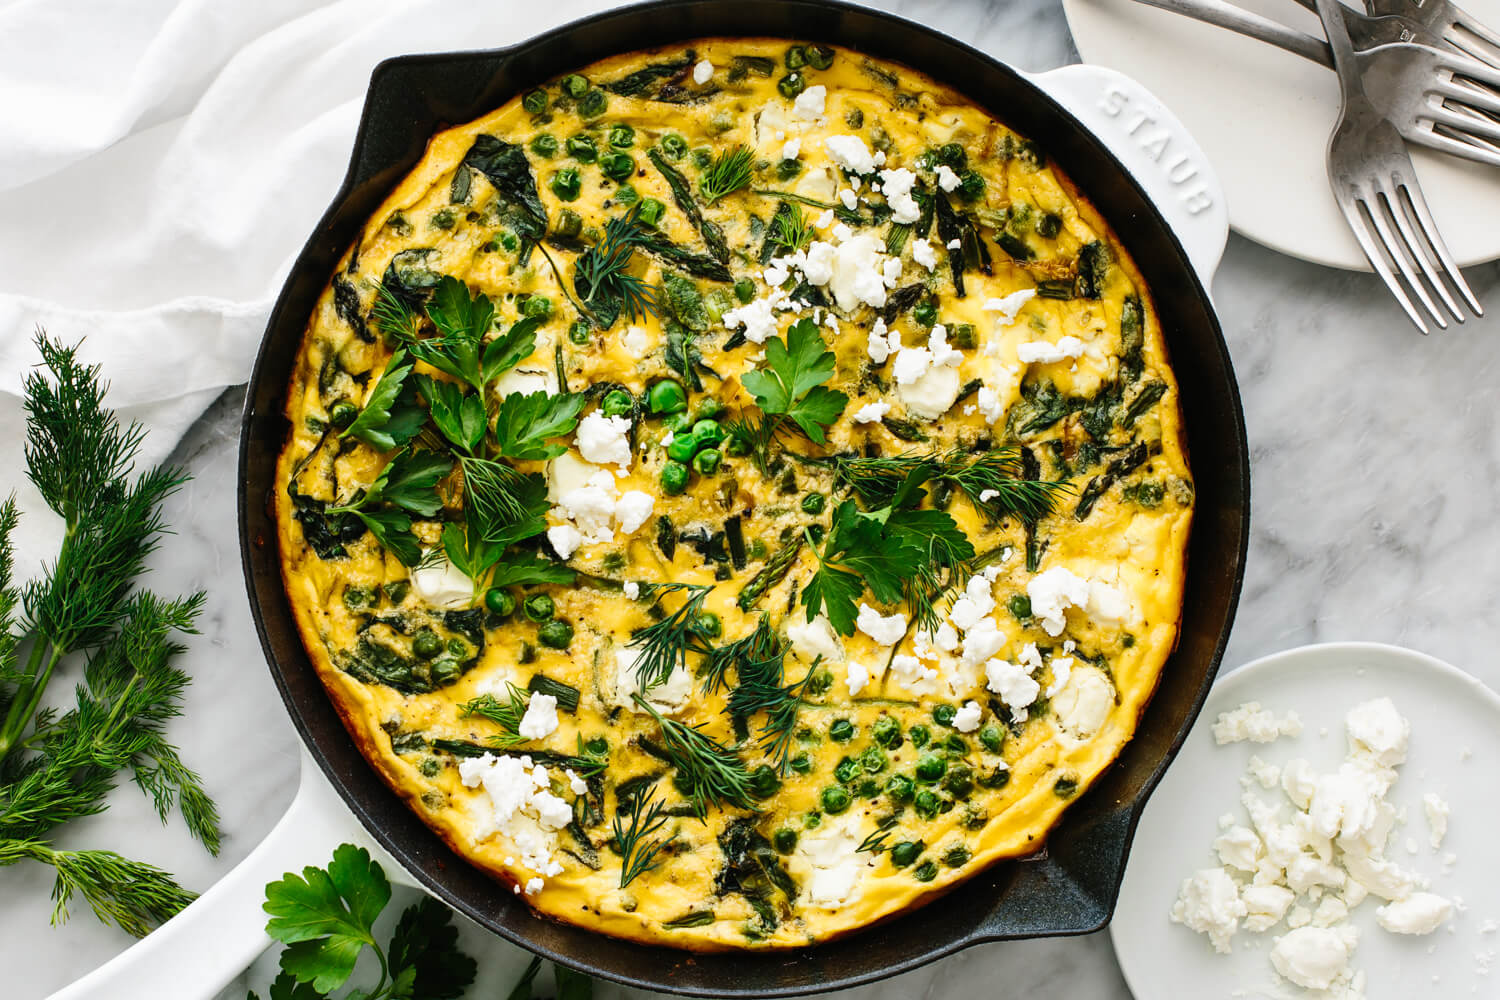 Spring vegetable frittata with leeks and asparagus.